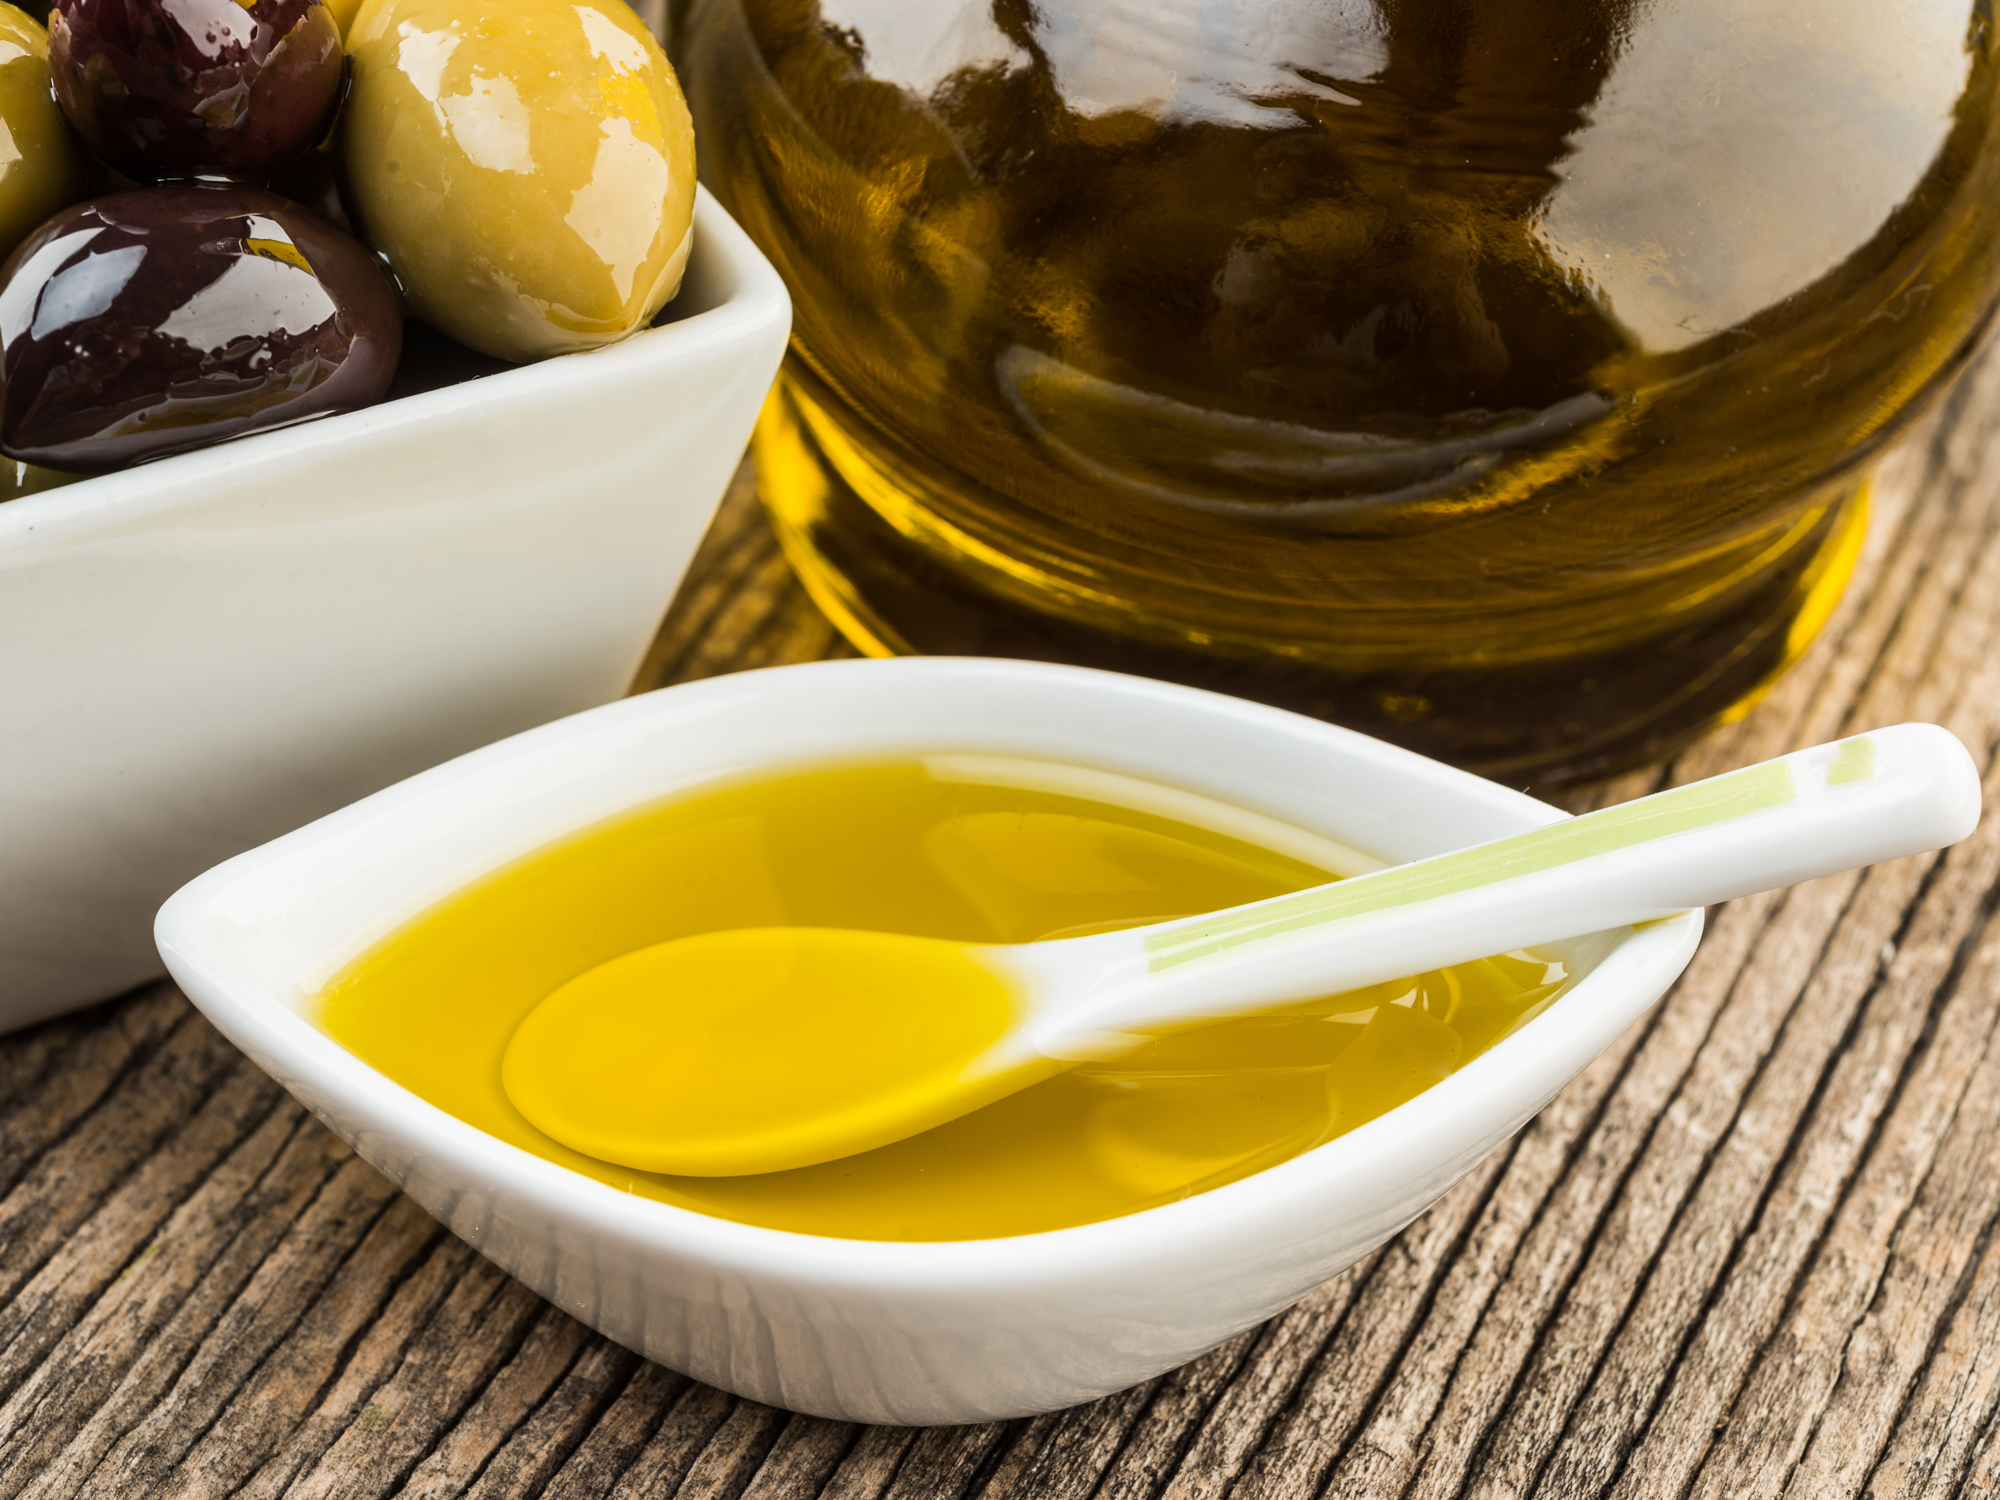 A tablespoon of olive oil a day could keep breast cancer away